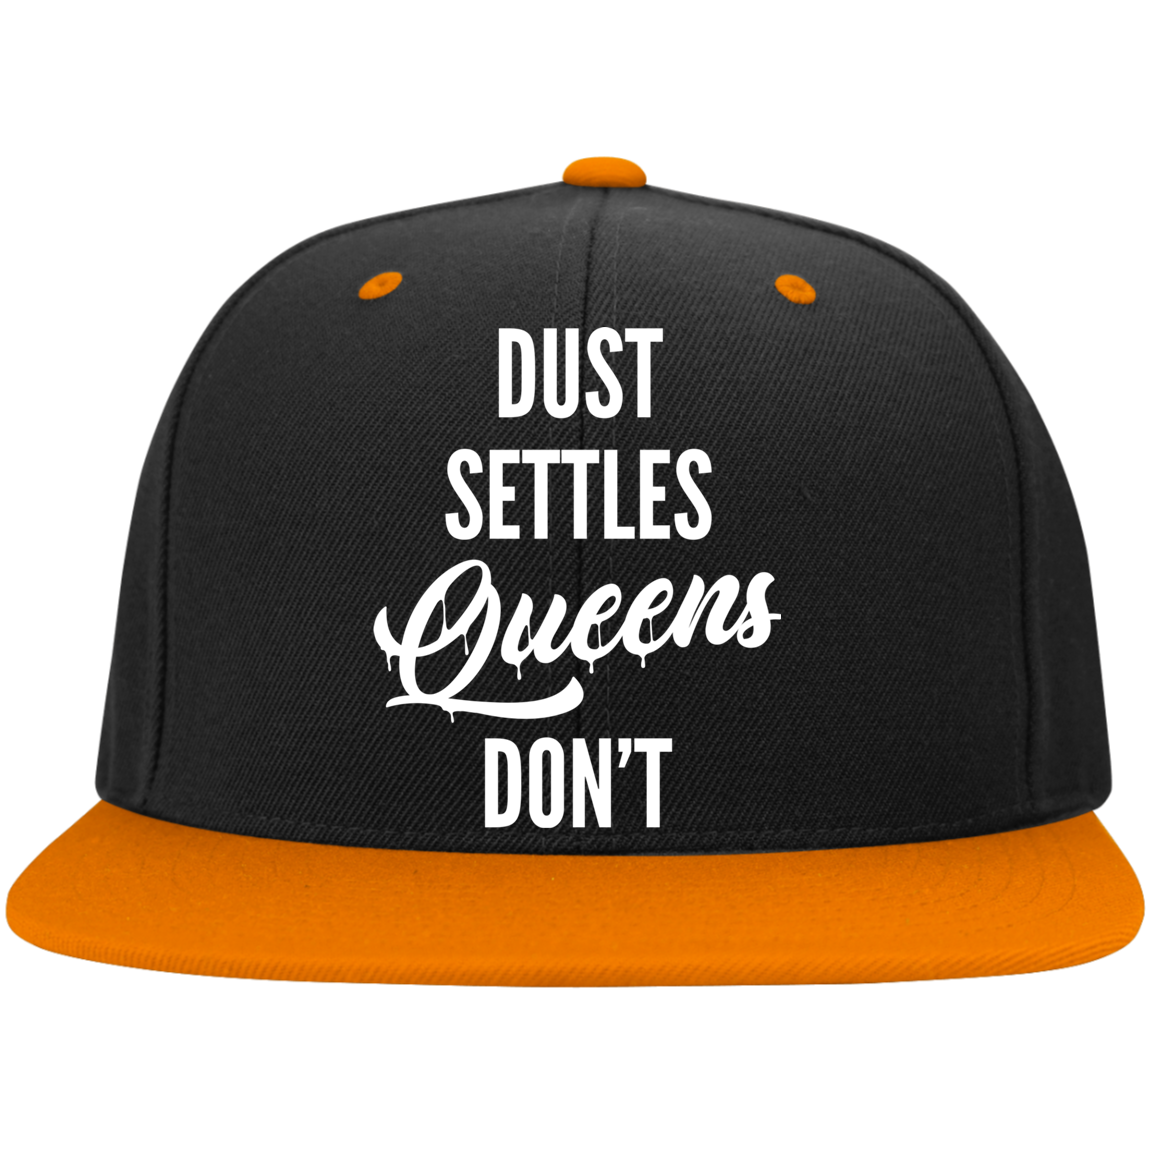 QUEENS DON'T SETTLE High-Profile Snapback Hat